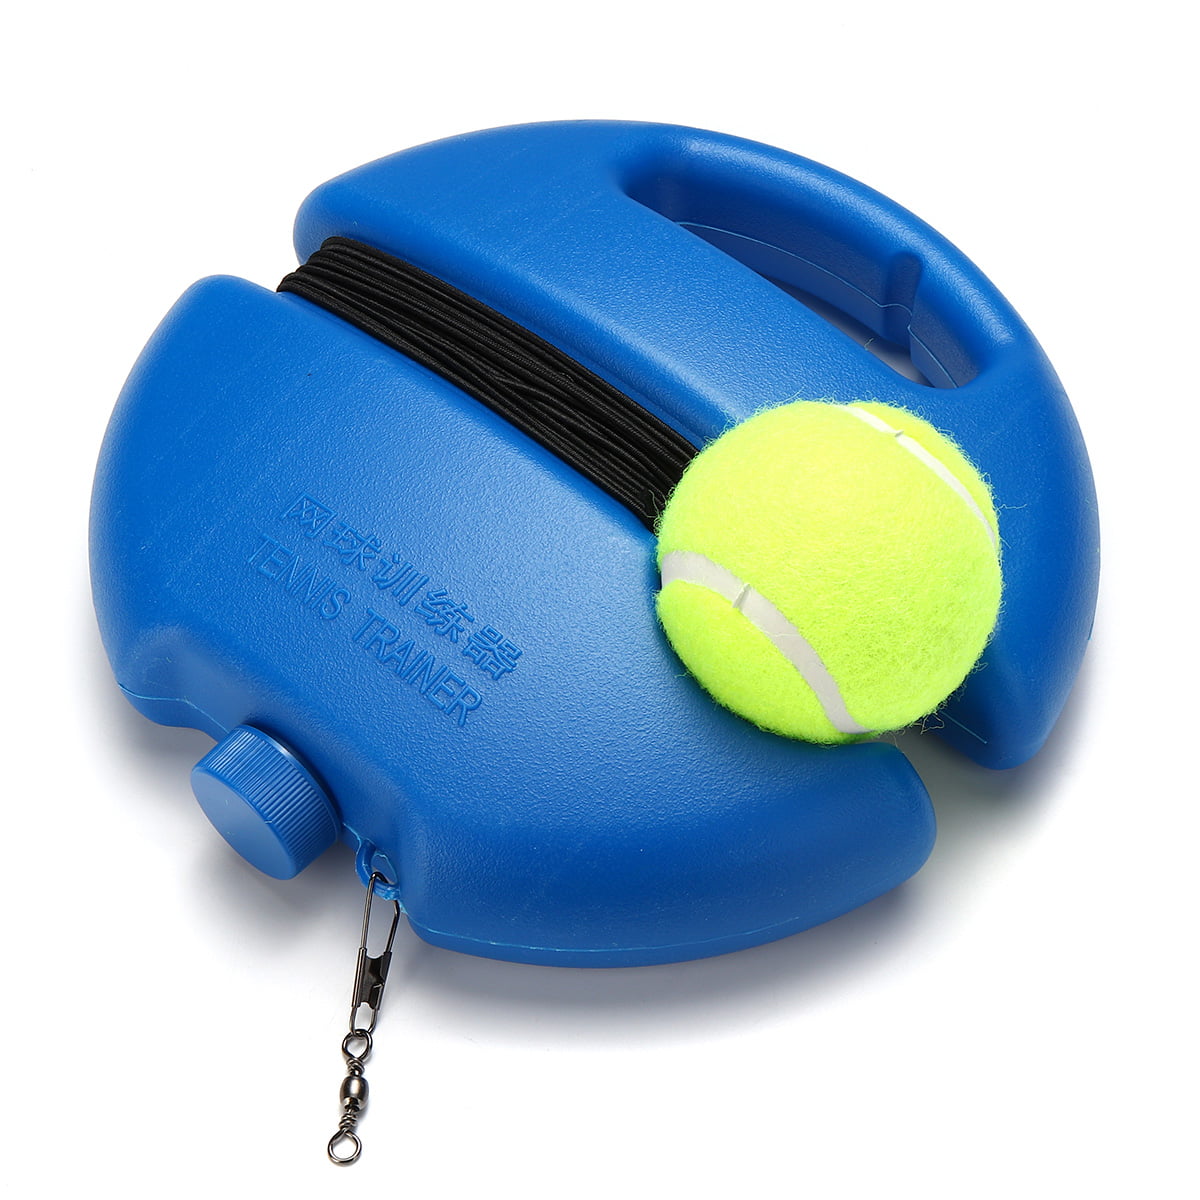 Domeilleur Base with Hoop Tennis Trainer Tennis Ball Singles Training Practice Balls Back Base Trainer Tools 